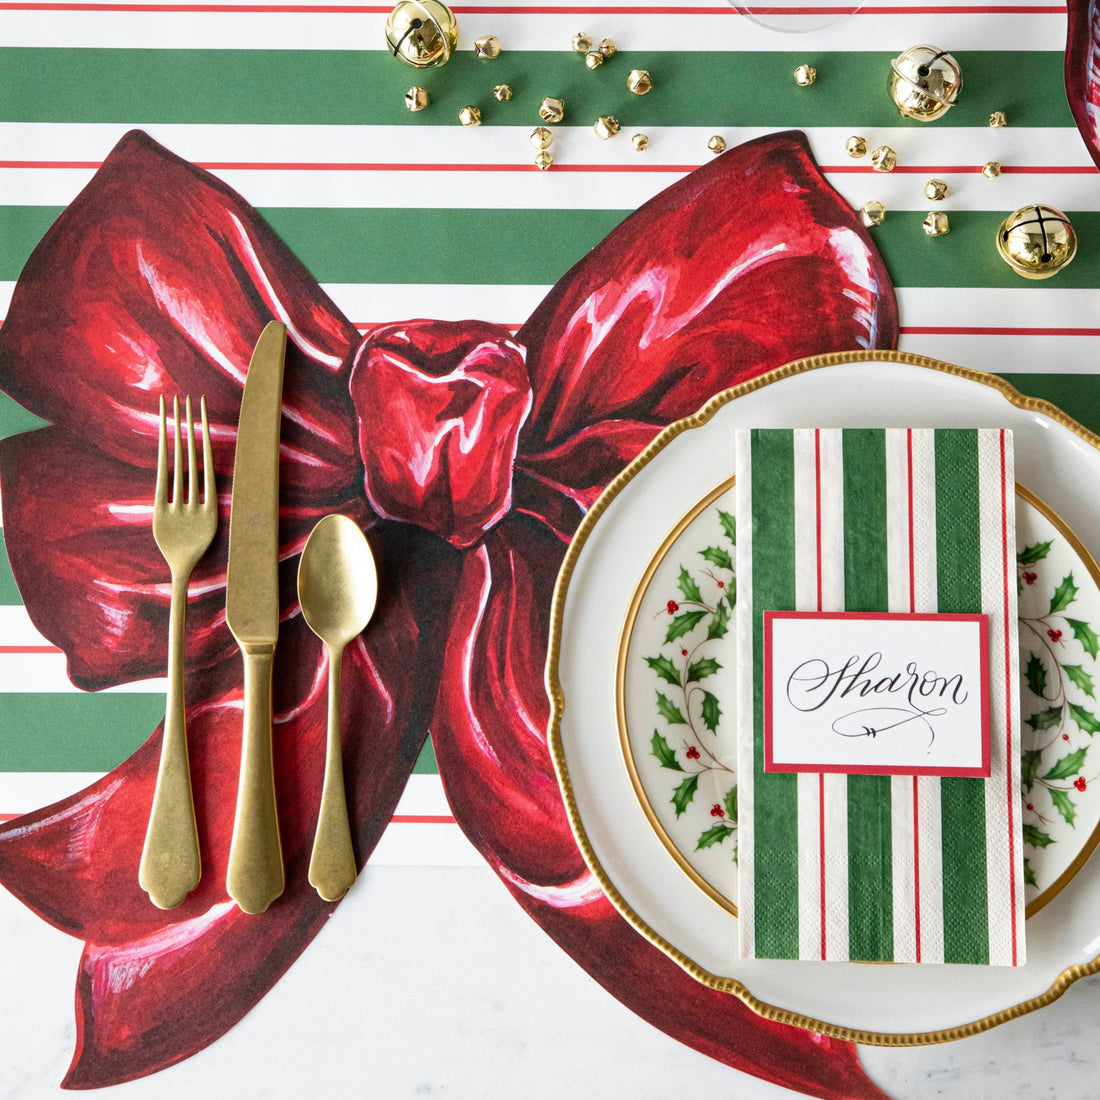 The Die-cut Bow Placemat under an elegant Christmas-themed place setting, from above.